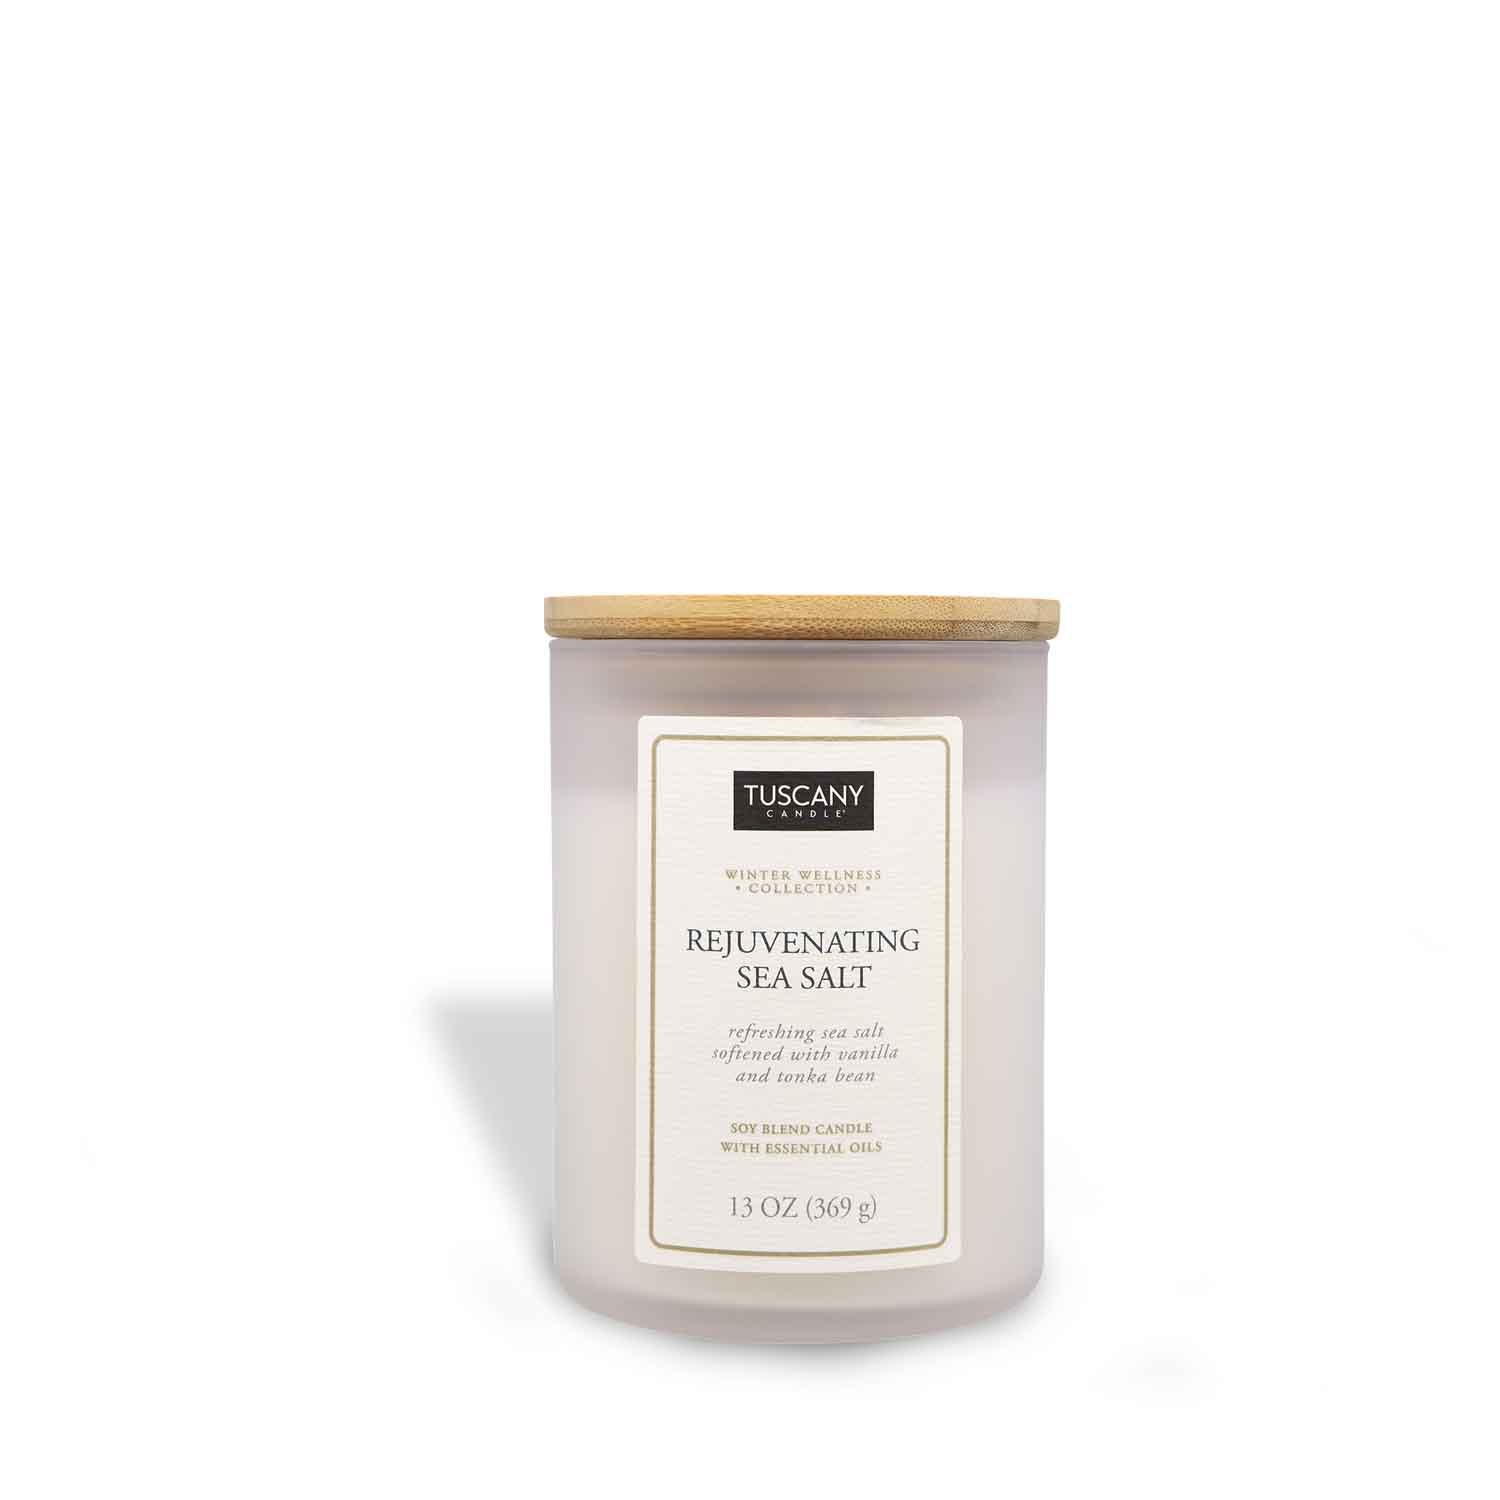 Refreshing Sea Salt candle from the Winter Wellness Aromatherapy collection, elegantly showcasing its white wax in a matte-finish colored jar, adorned with a simplistic paper label.